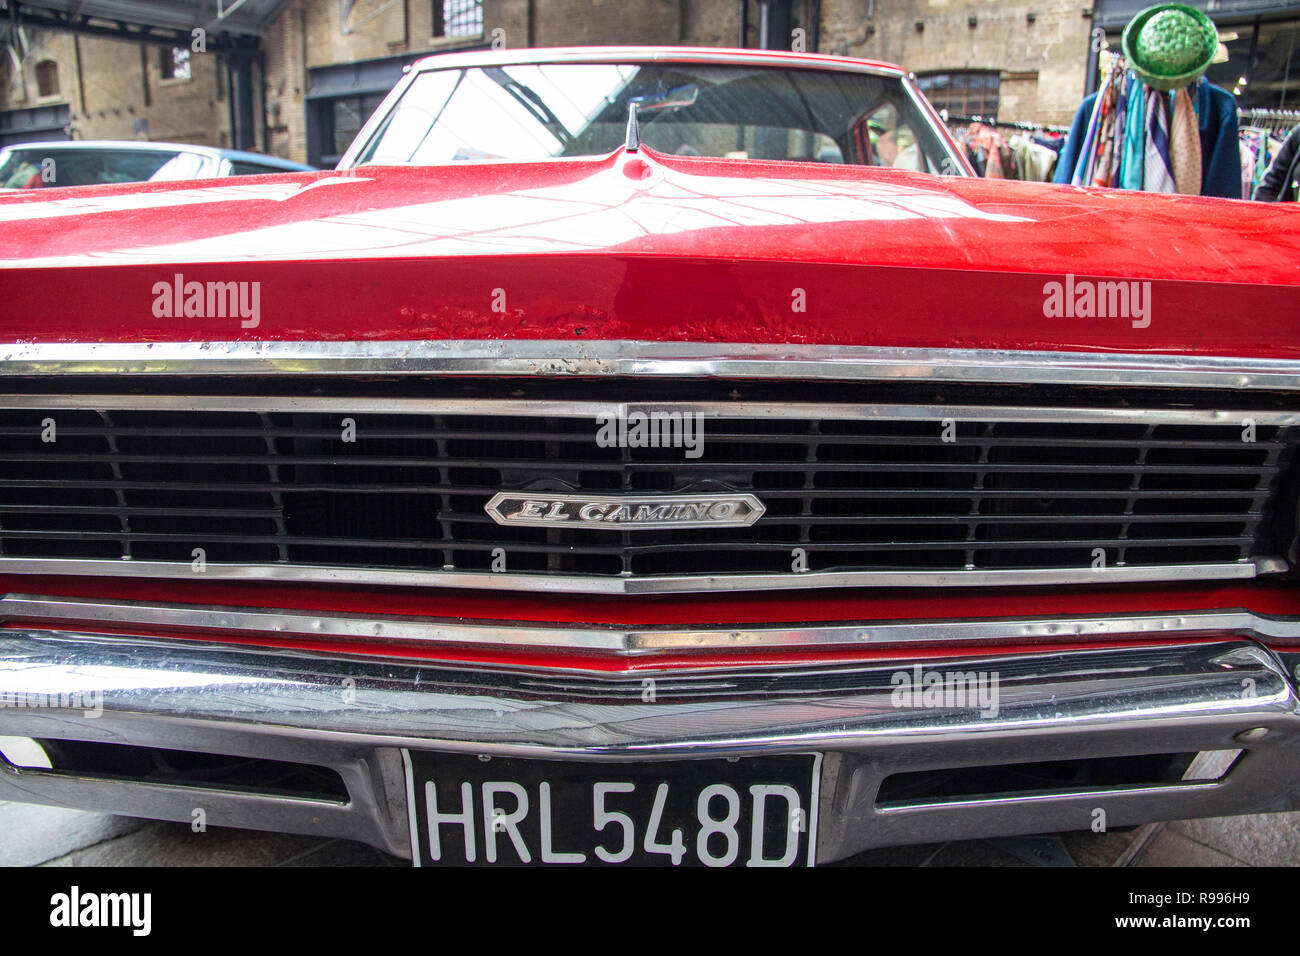 LONDON, ENGLAND - April 28, 2018. 1966 Red El Camino Ford Chevrolet at the  Annual Classic Car Exhibition and Vintage Clothing Market at Kings Cross, L  Stock Photo - Alamy